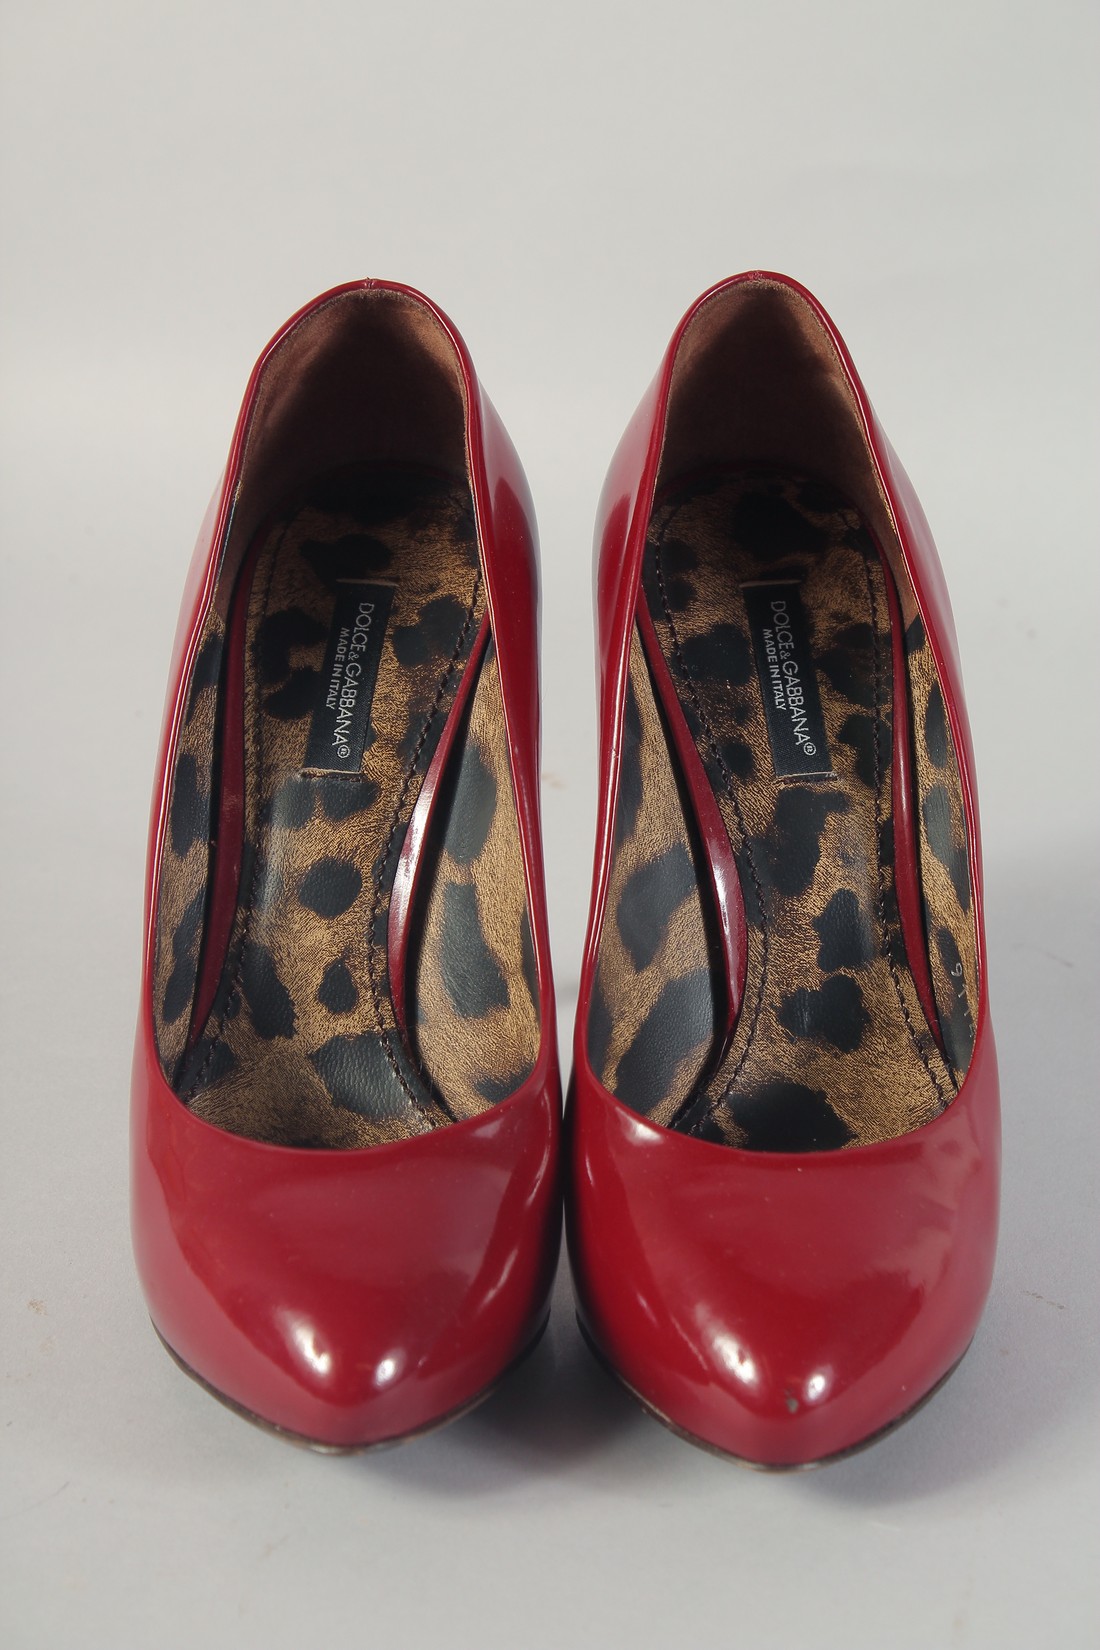 A PAIR OF DOLCE AND GABBANA RED HIGH HEEL SHOES. Size 37. - Bild 2 aus 7